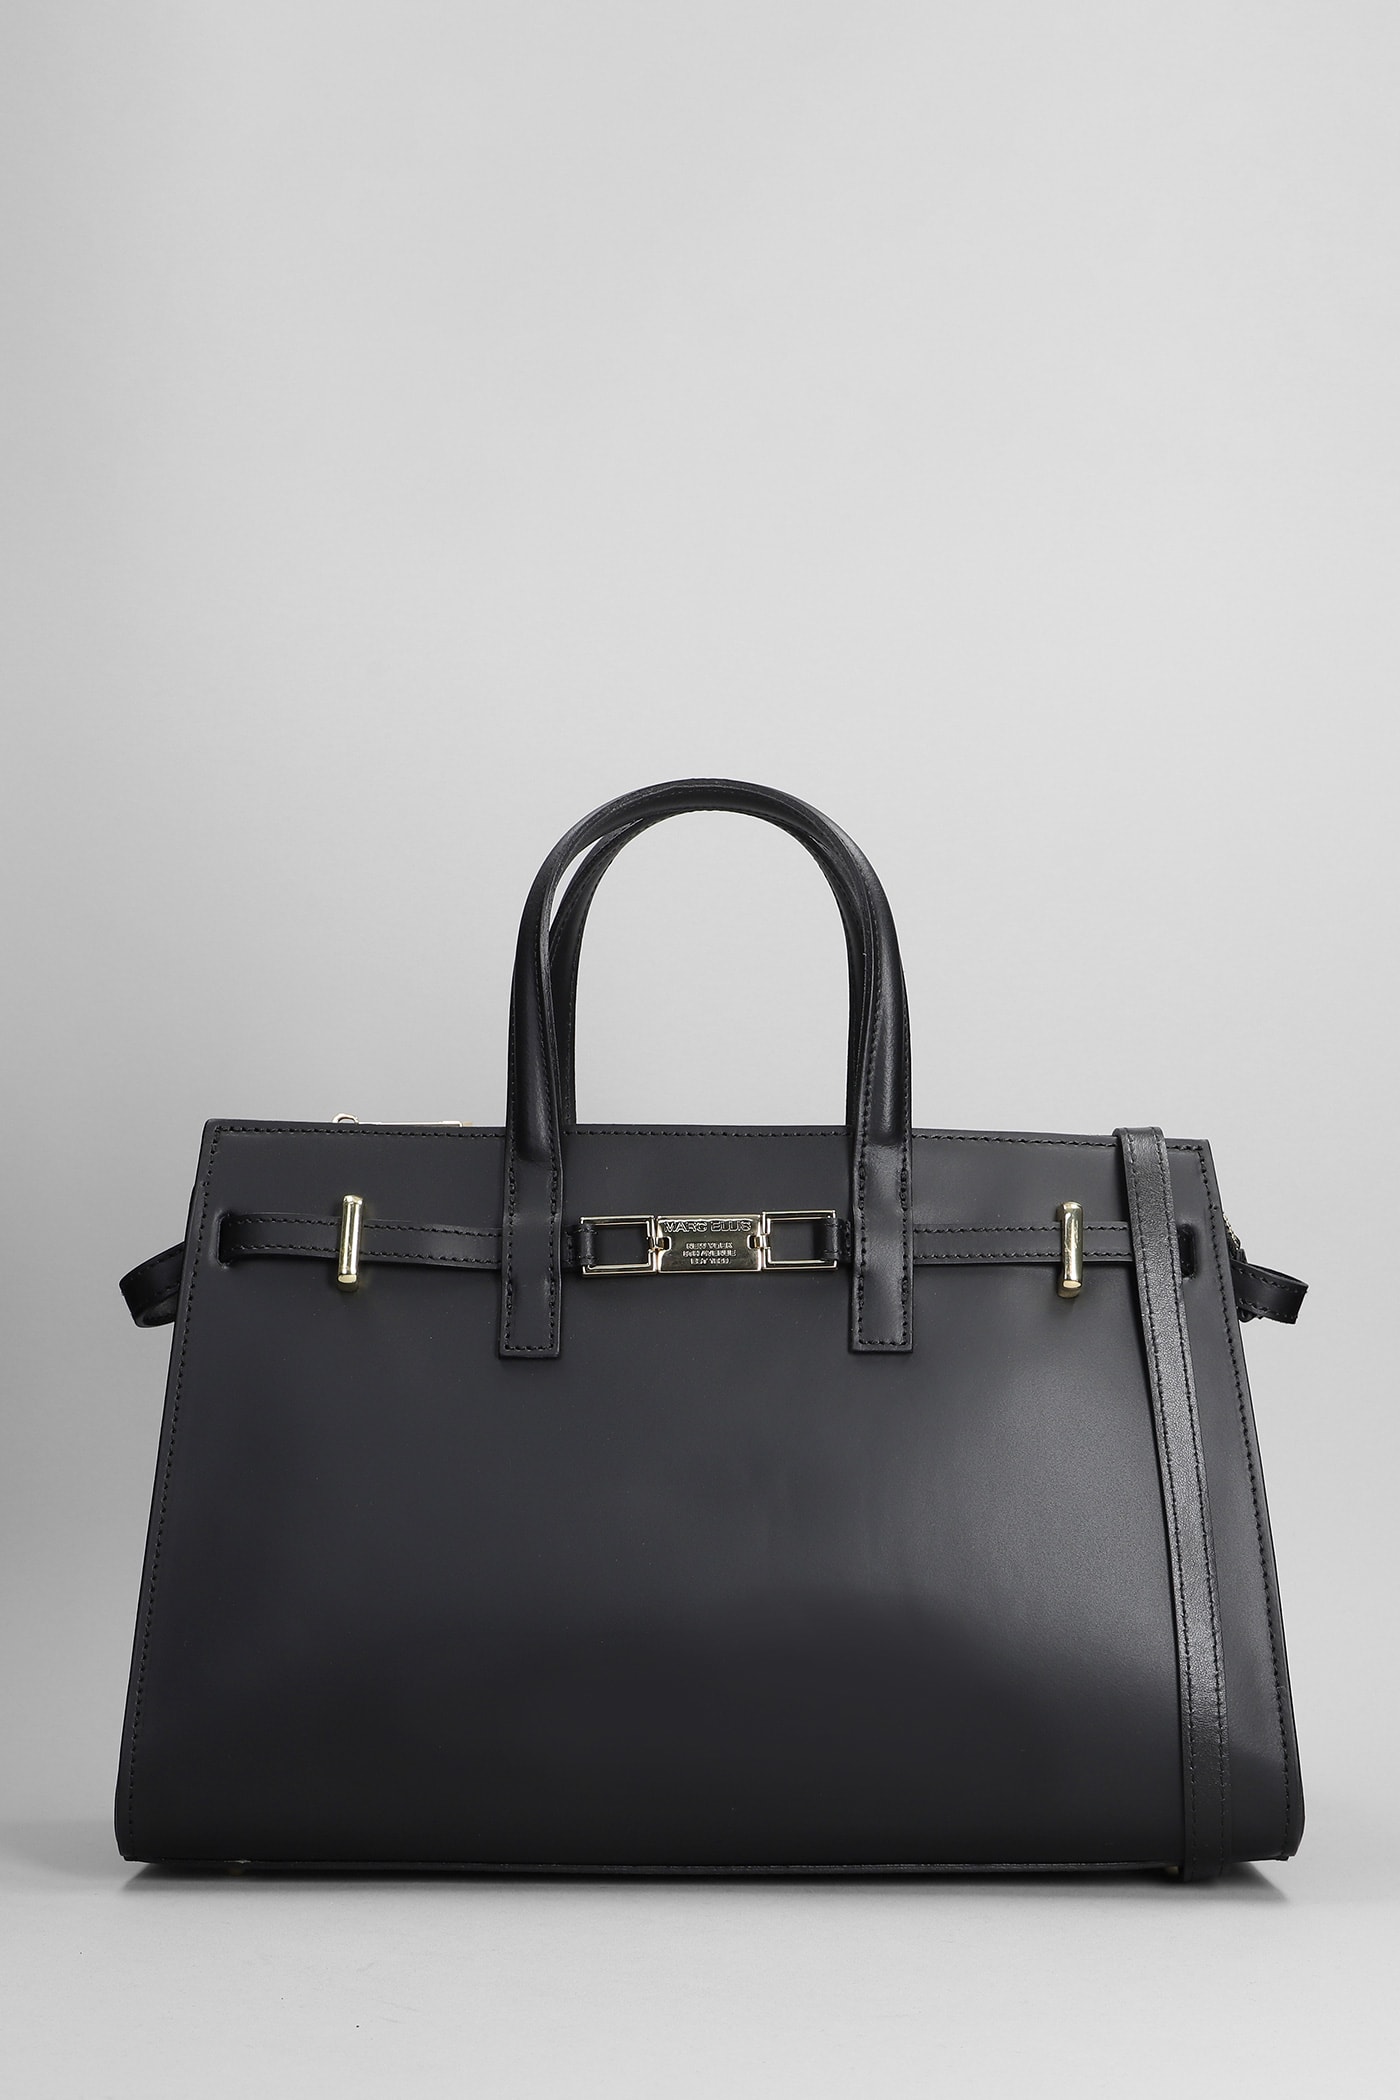 Lady L Tote In Black Faux Leather